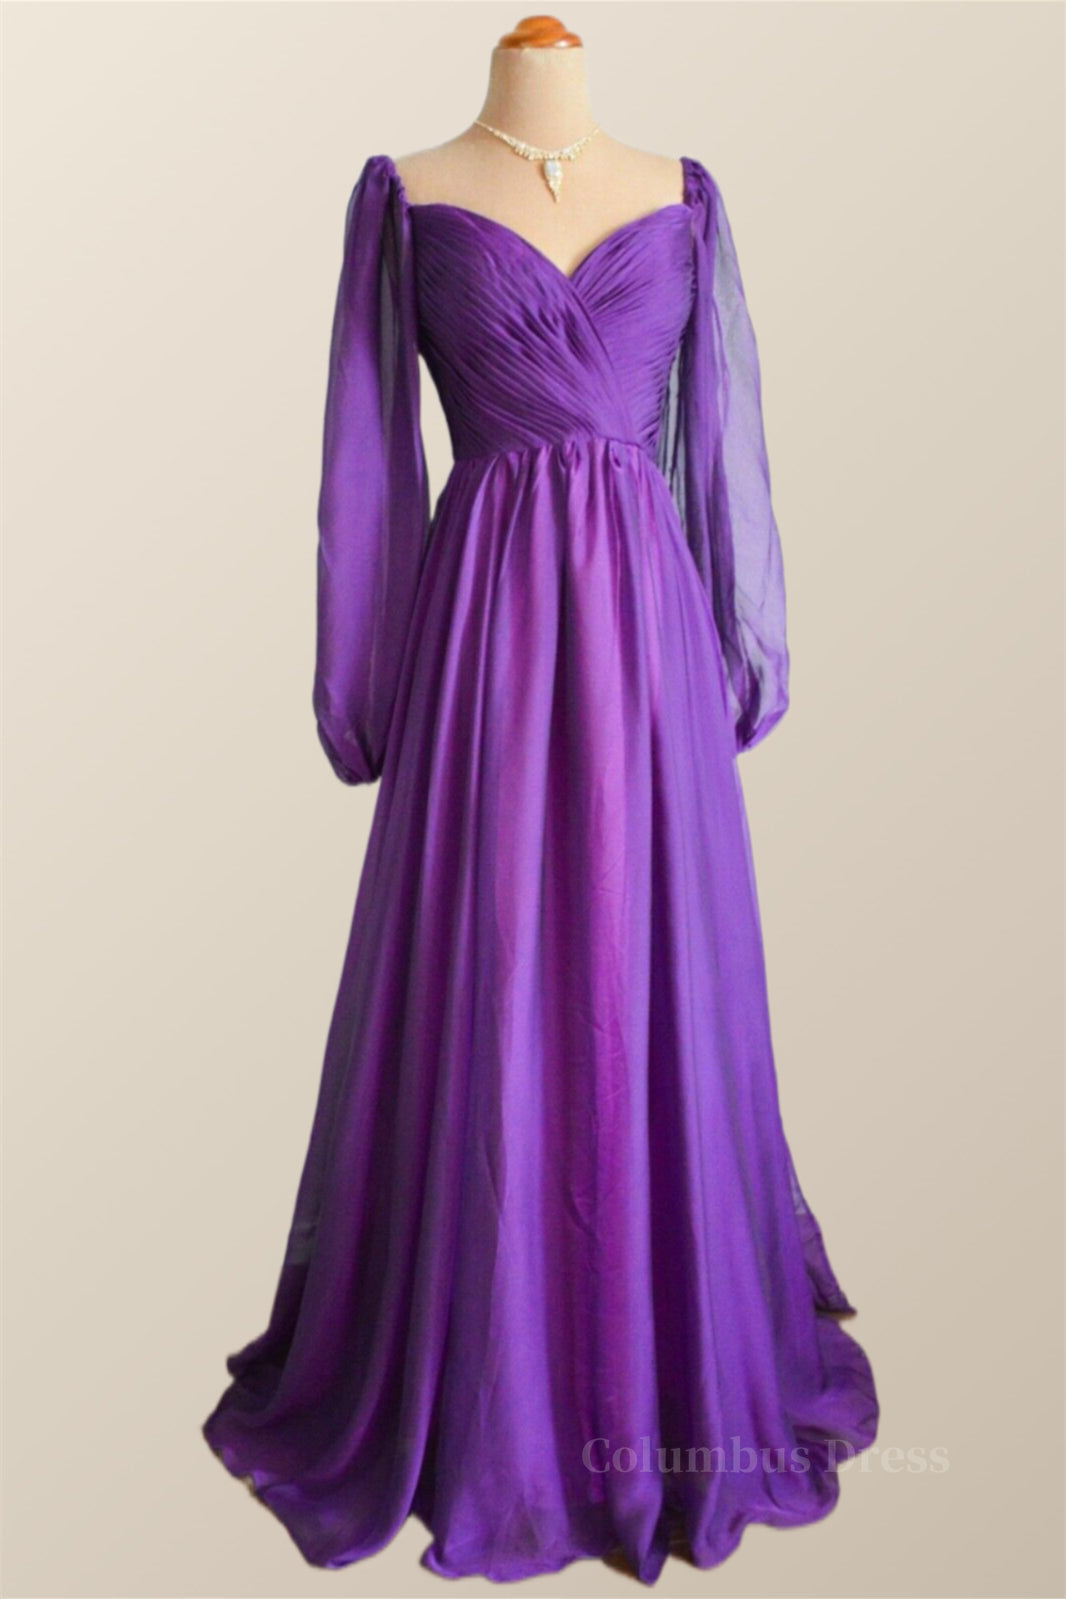 Formal Dresses To Wear To A Wedding, Long Sleeves Purple A-line Long Formal Dress